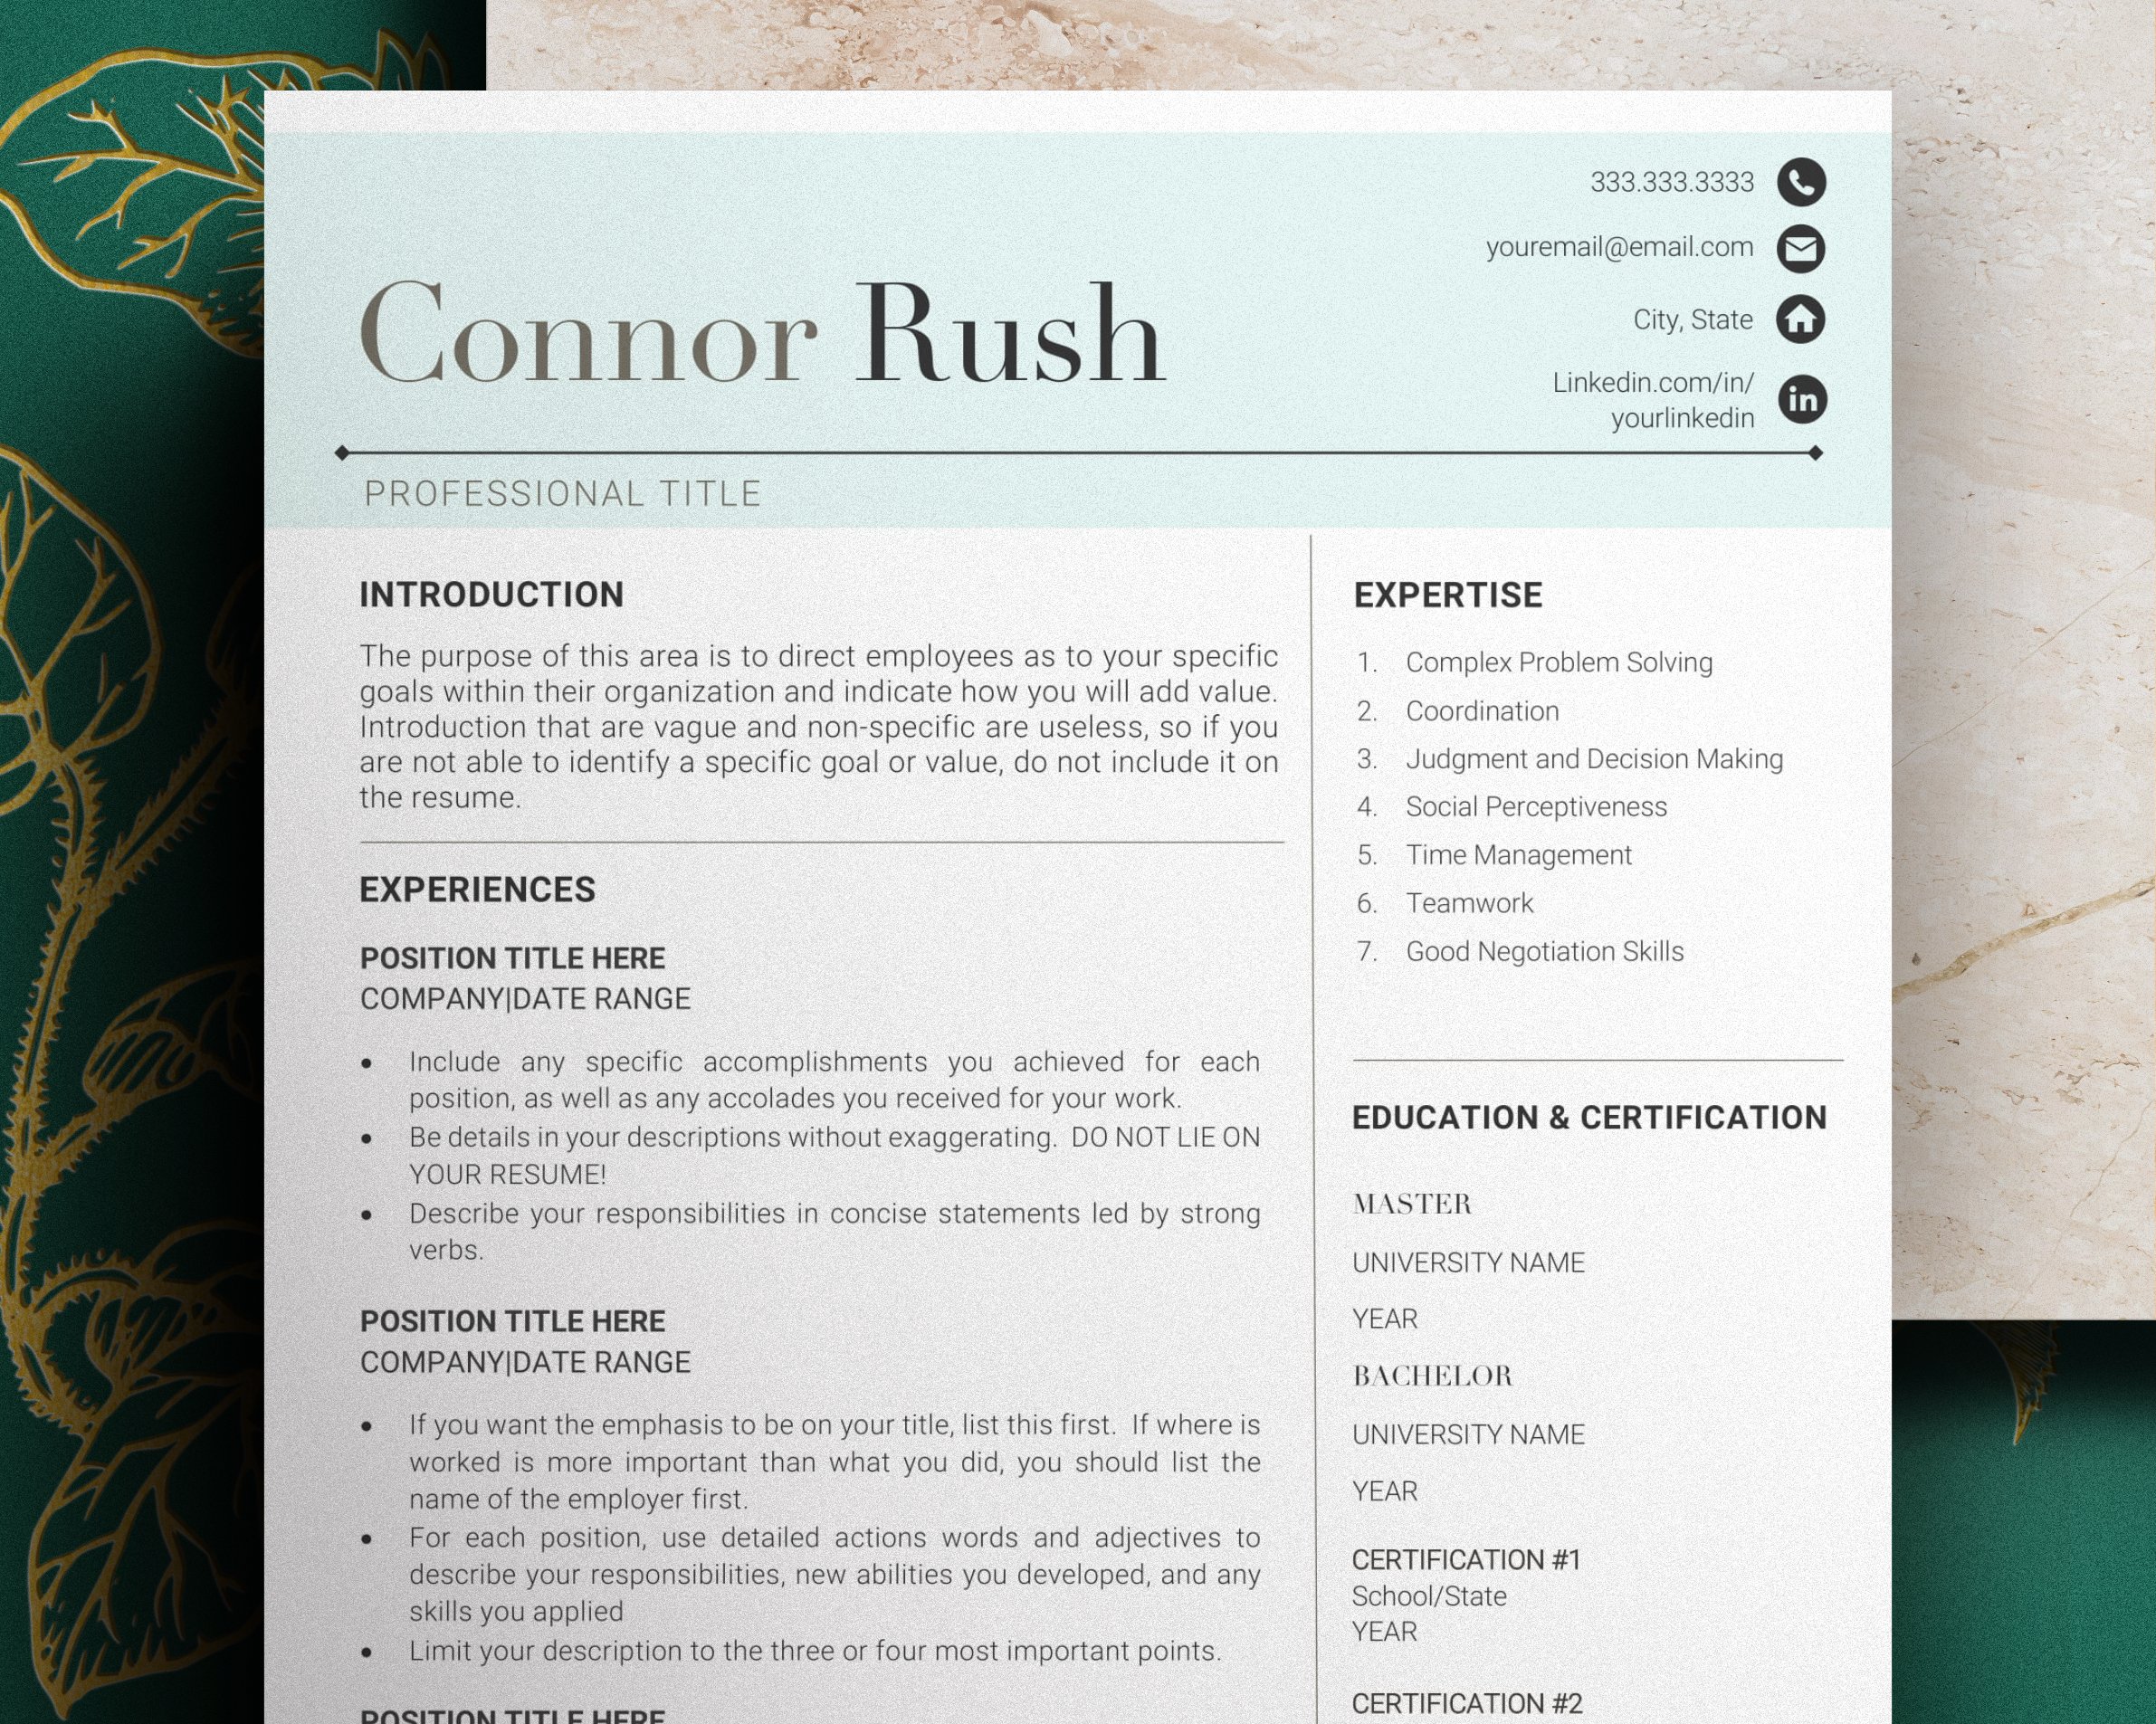 Resume / CV with bonuses! - Connor cover image.